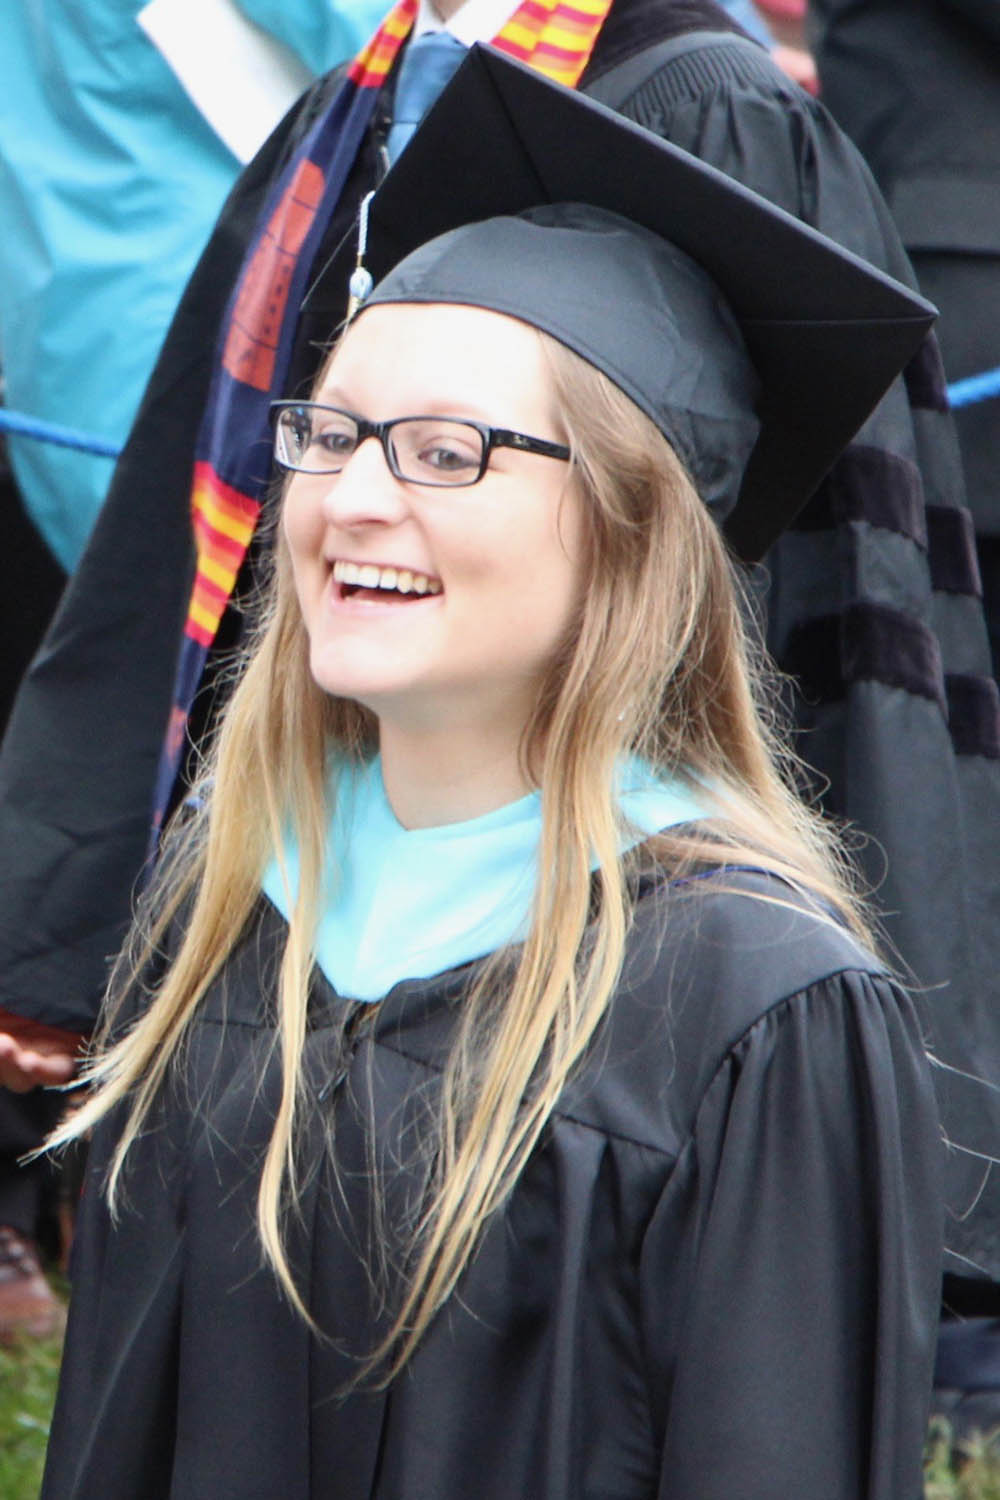 Casedy Thomas smiles while she is in her graduation cap and grown